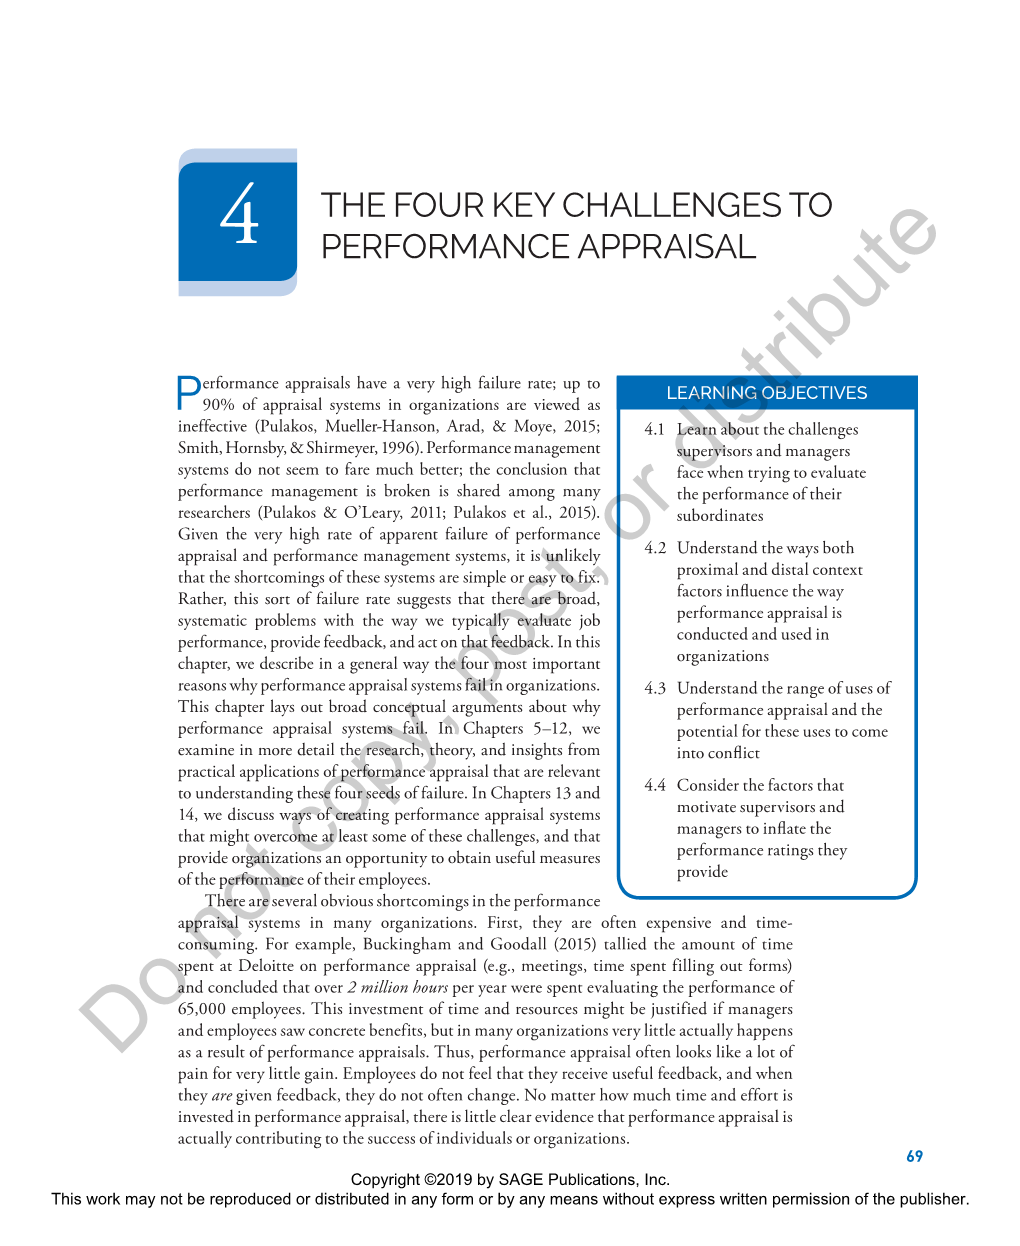 The Four Key Challenges to Performance Appraisal 71